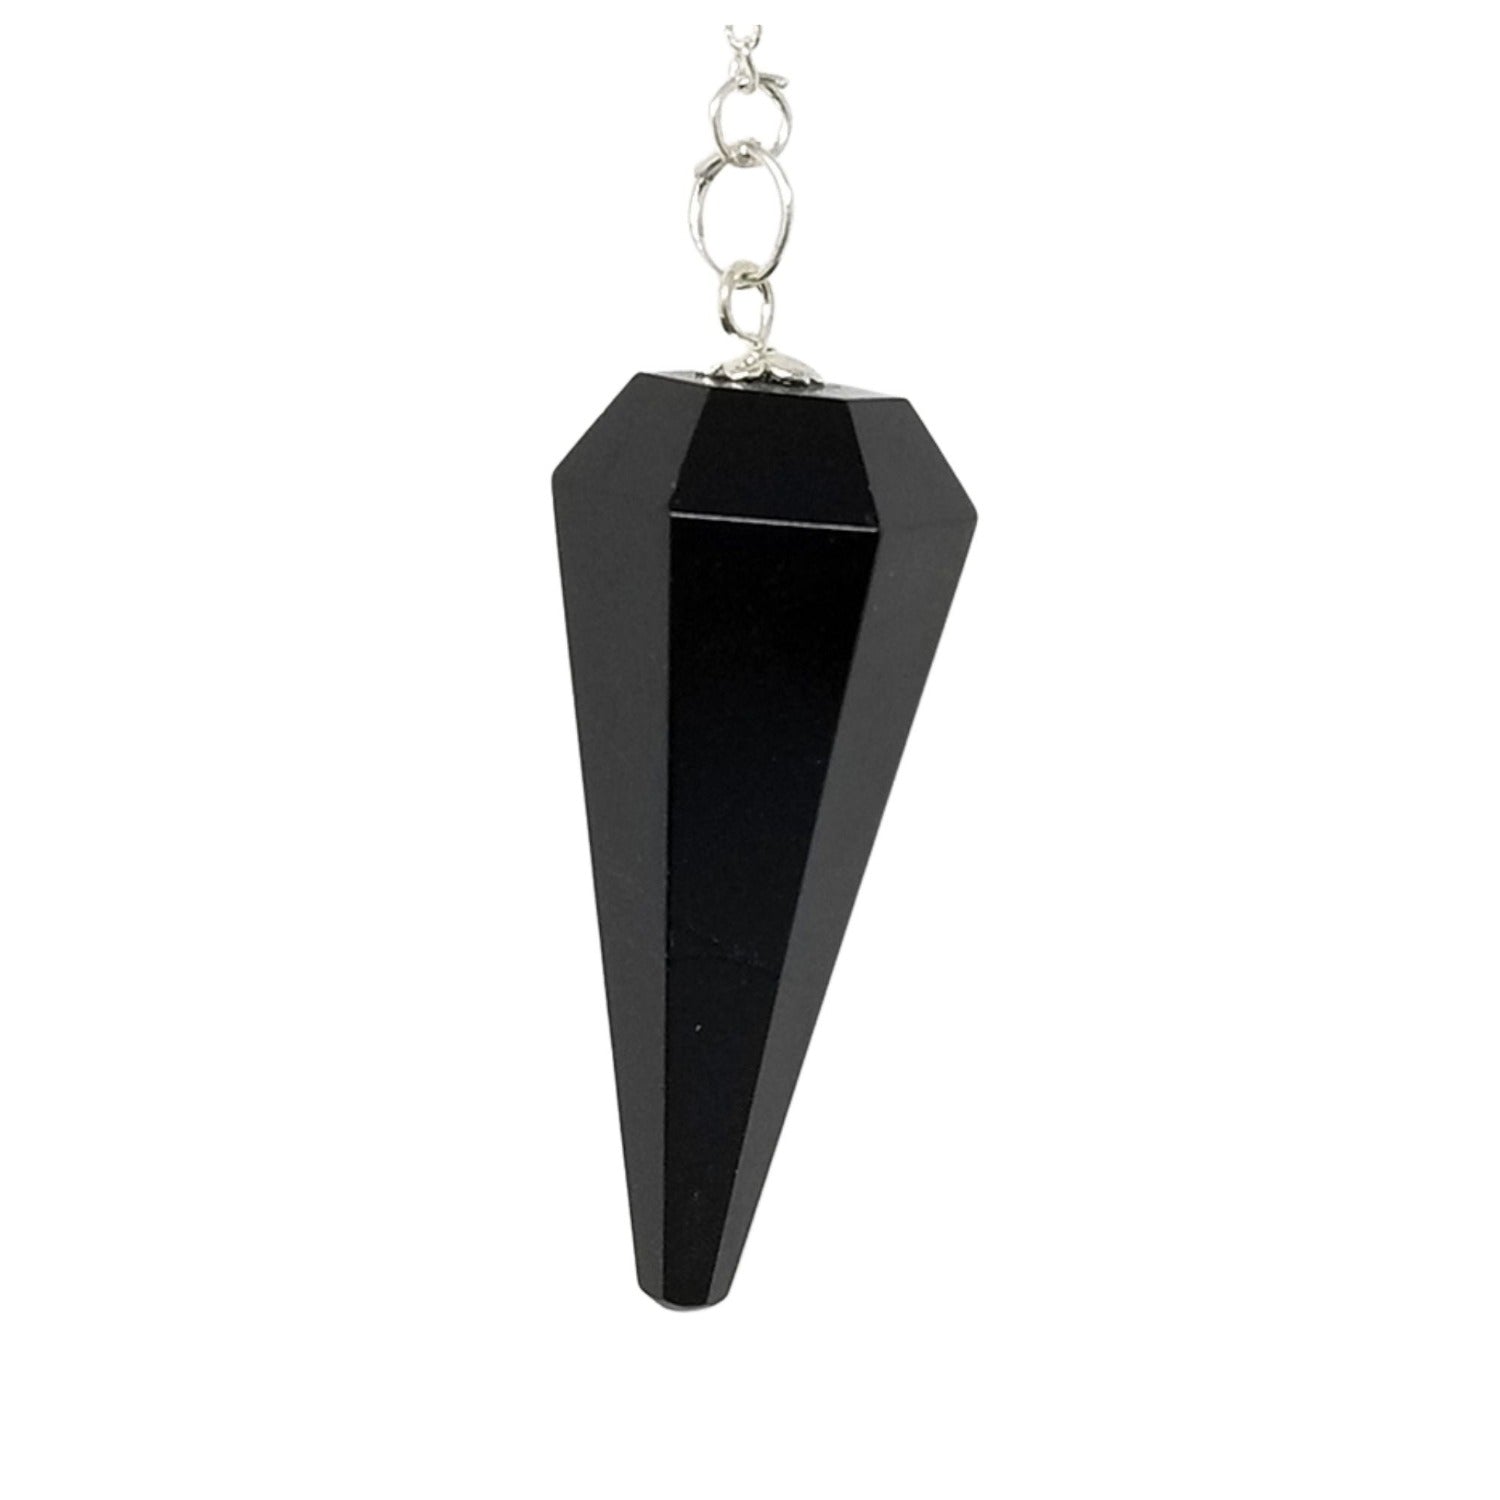 Black Tourmaline Pendulum with Chain, Faceted Natural Crystal Stone